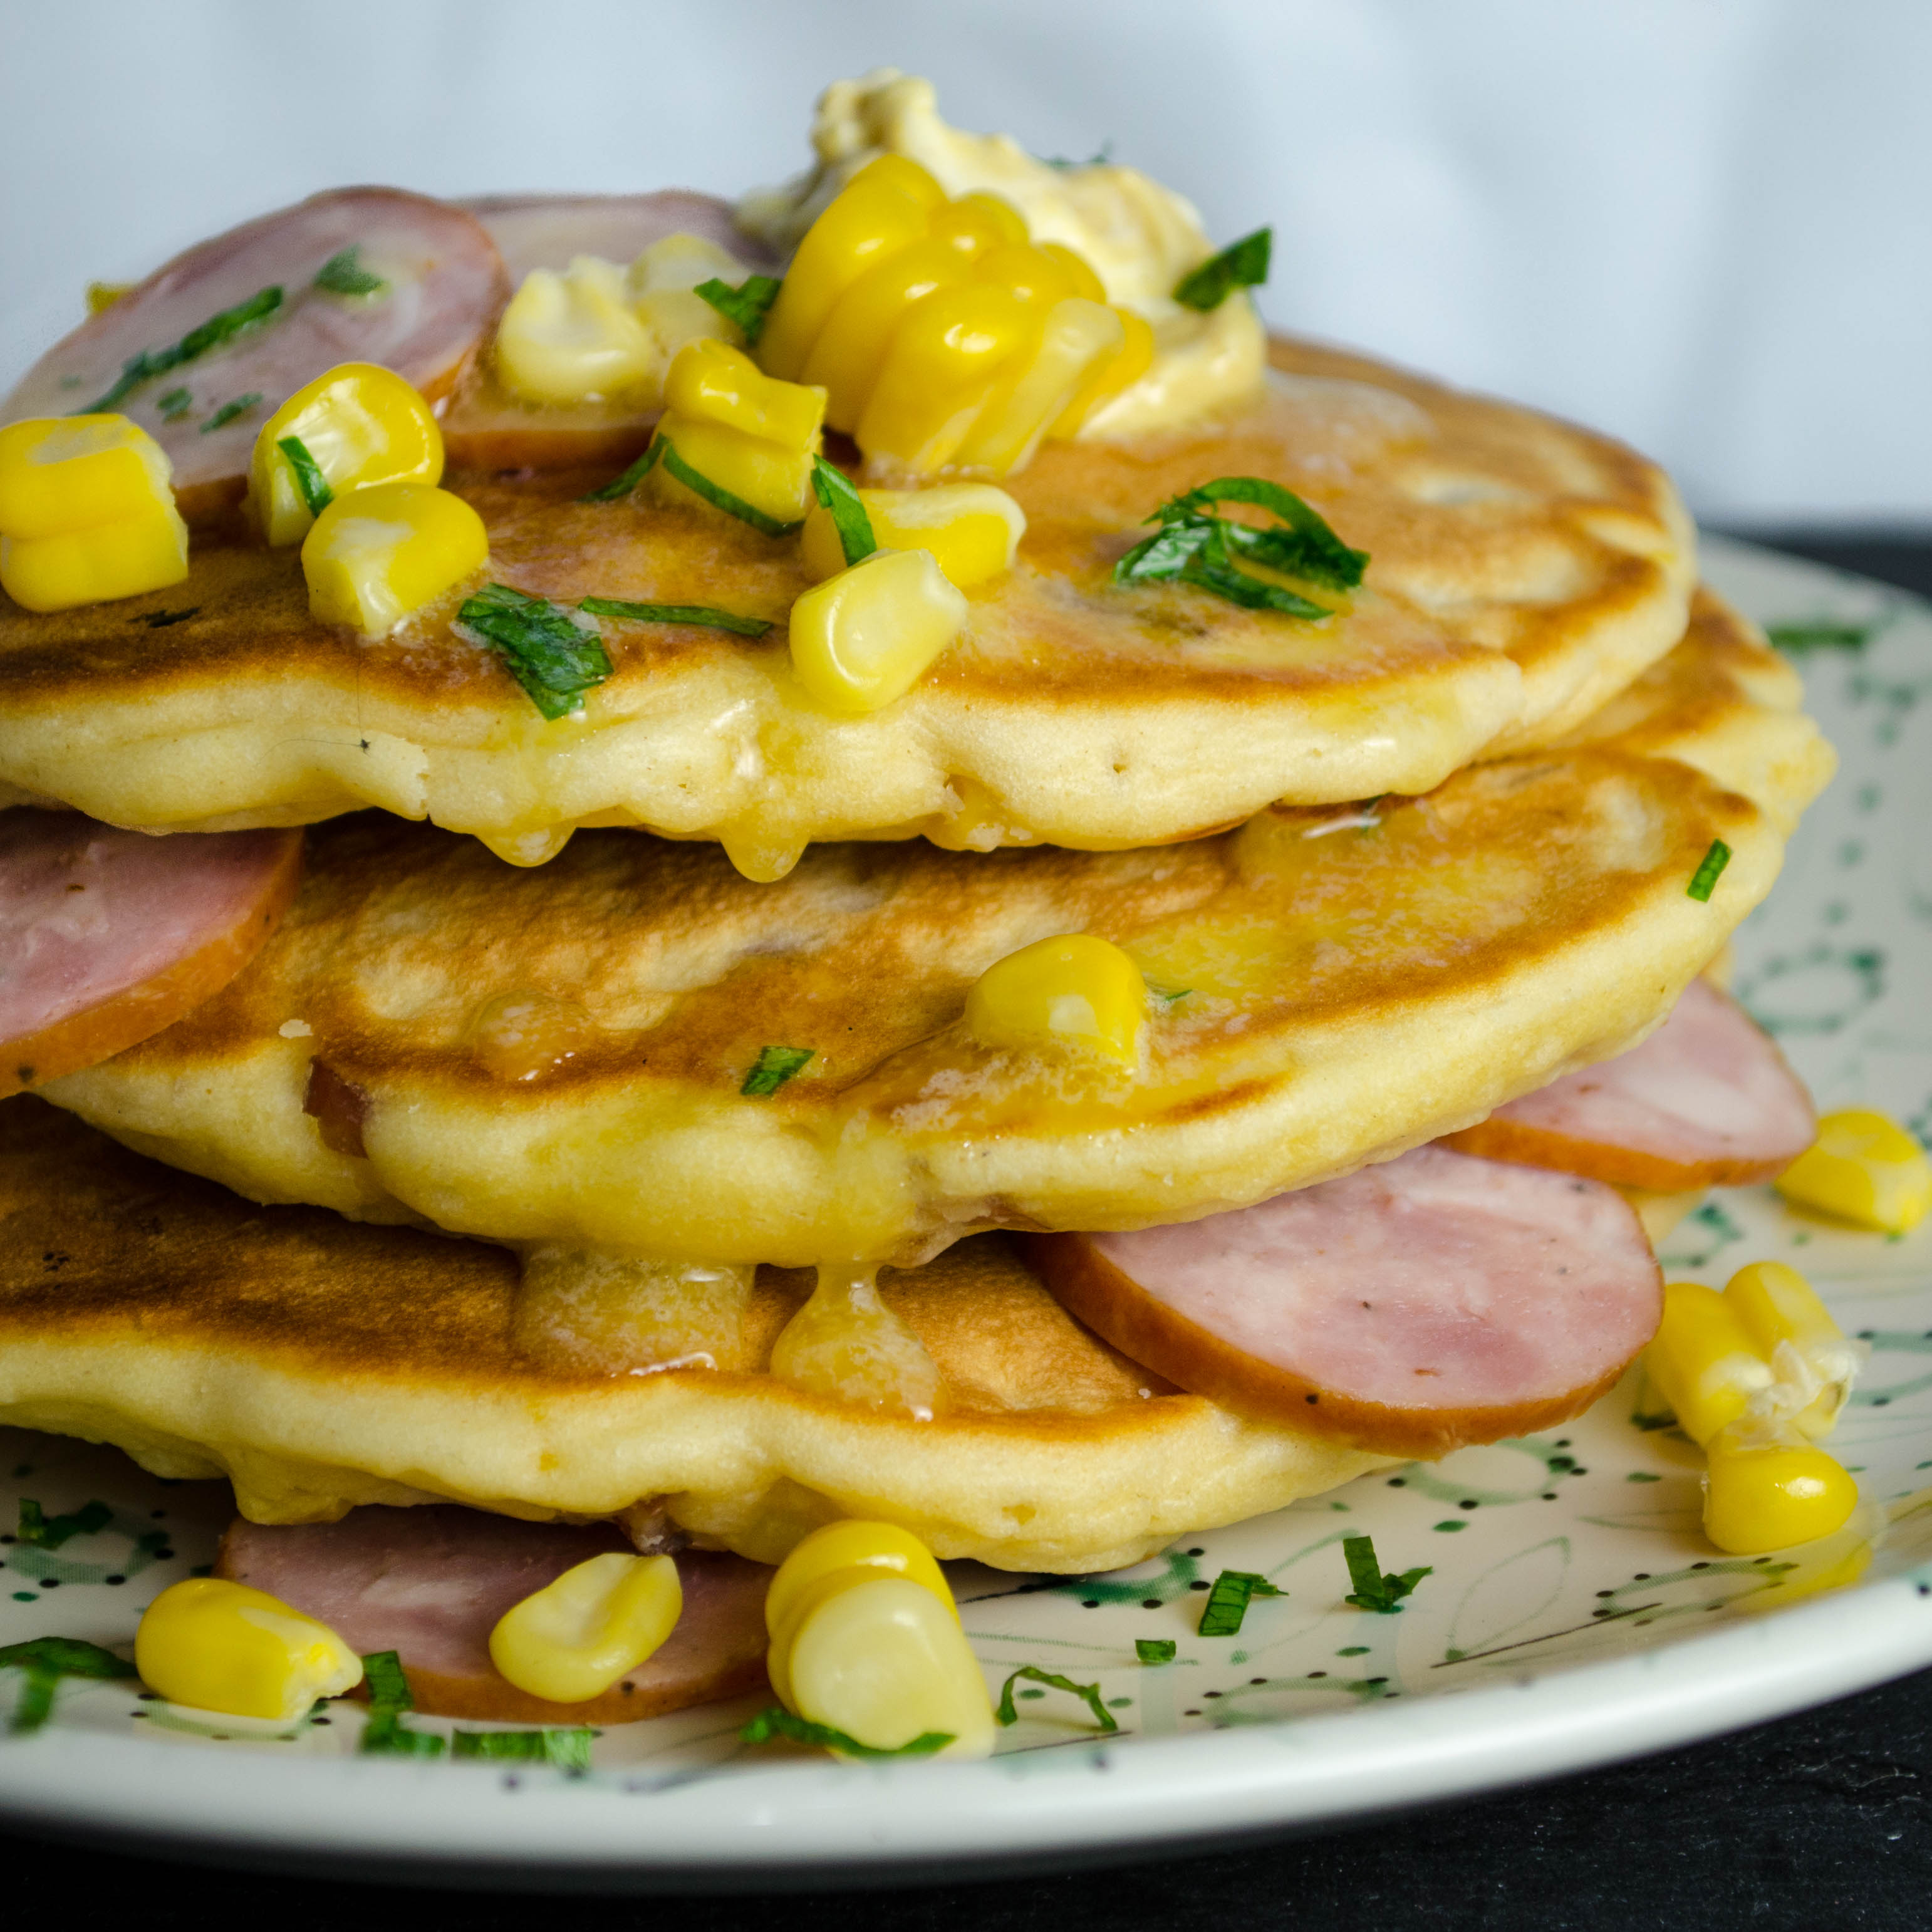 Savory pancakes with kielbasa and corn on a floral patterned plate